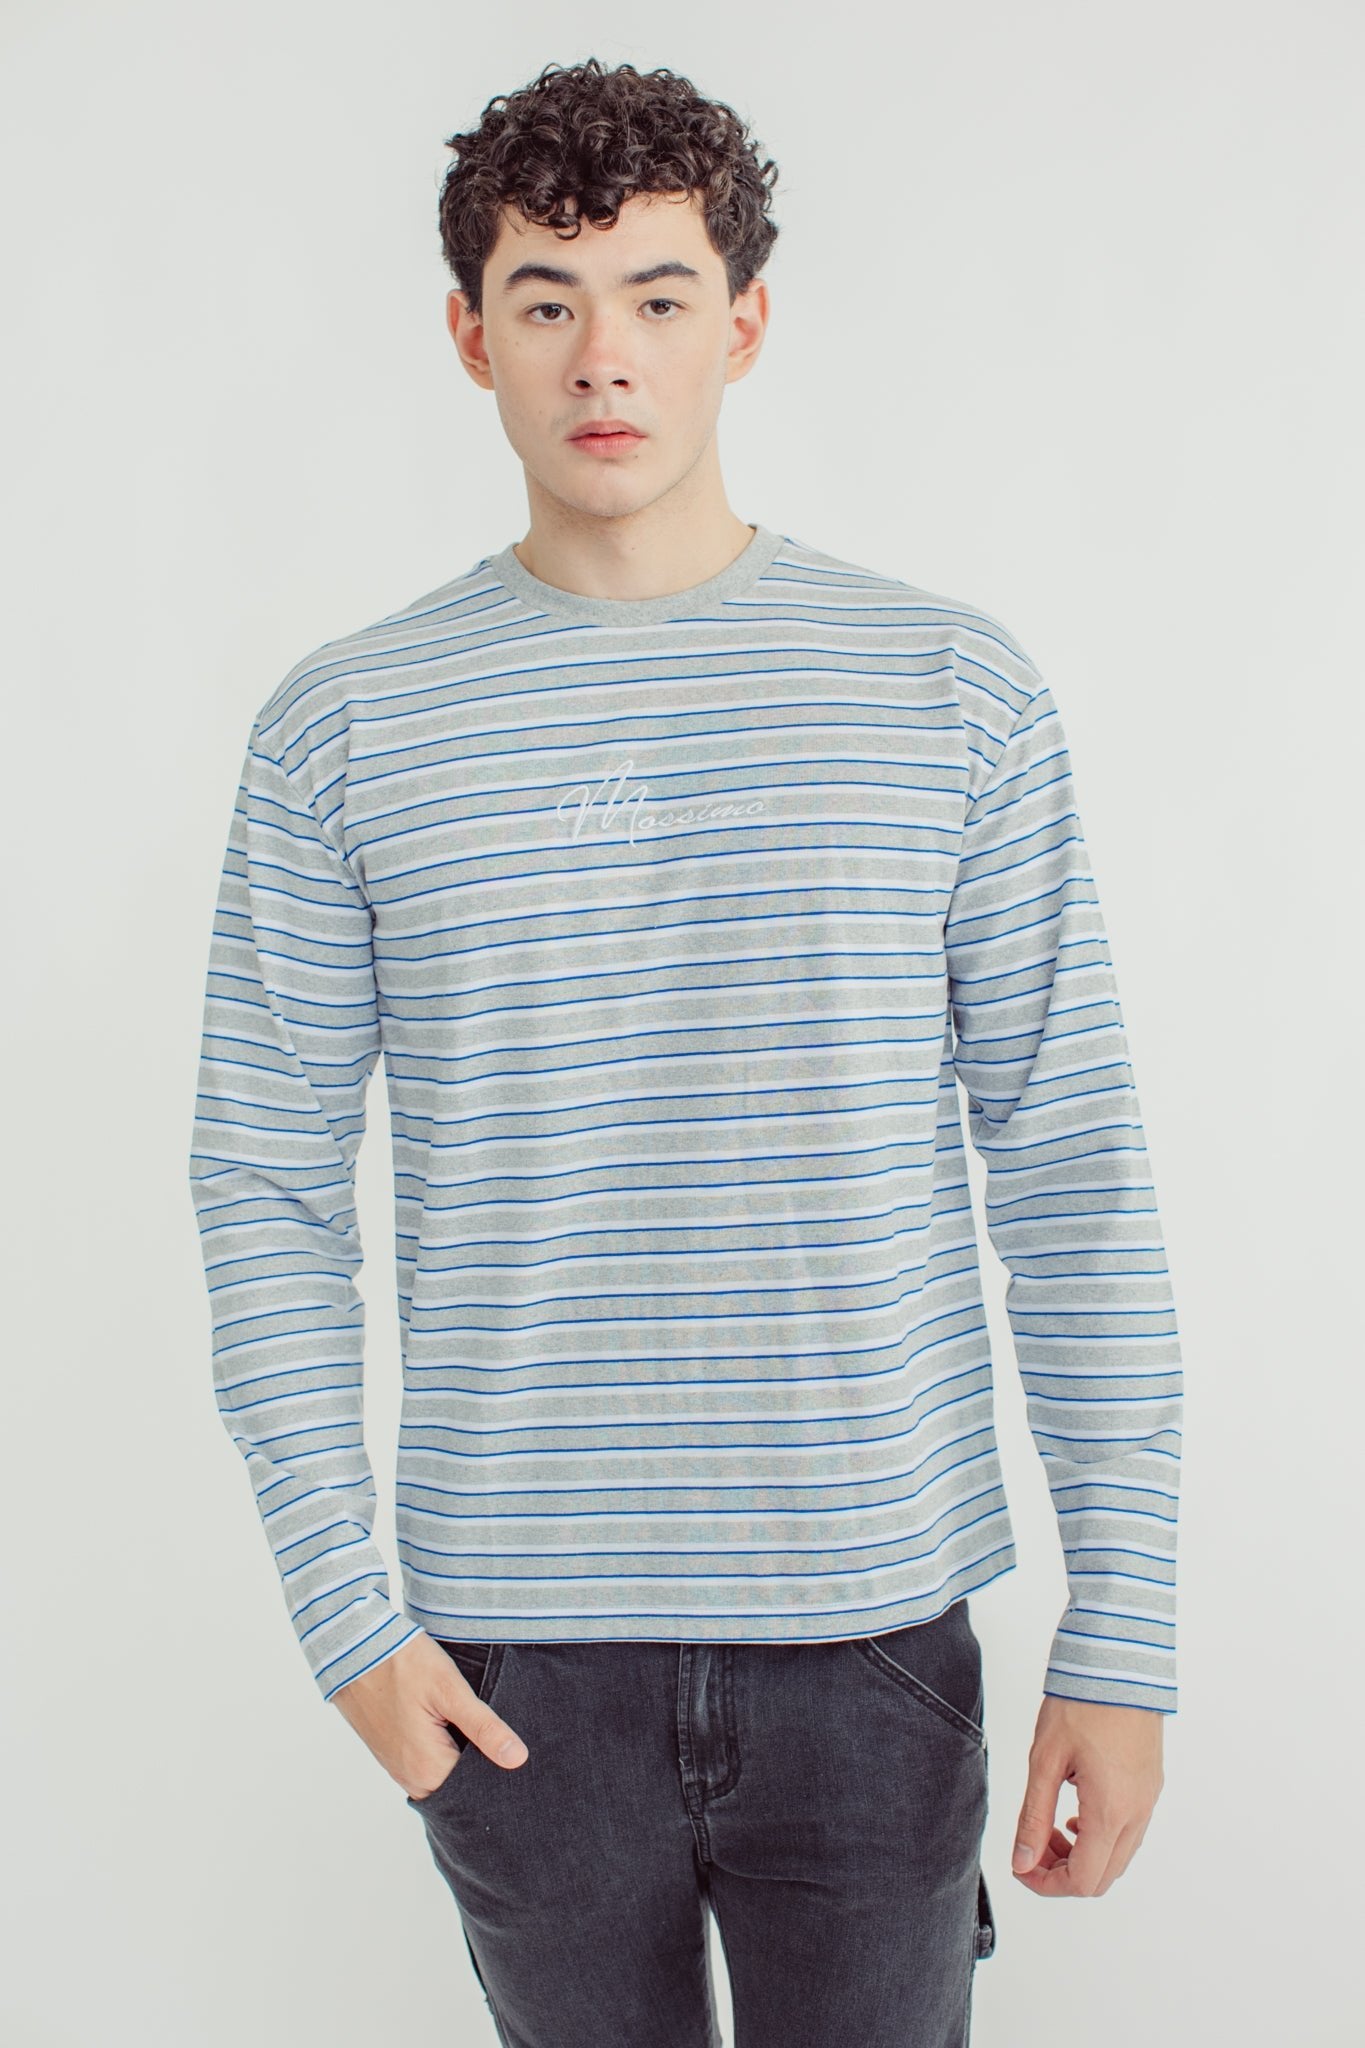 White Gray Long Sleeve Stripes with Embroidery - Mossimo PH